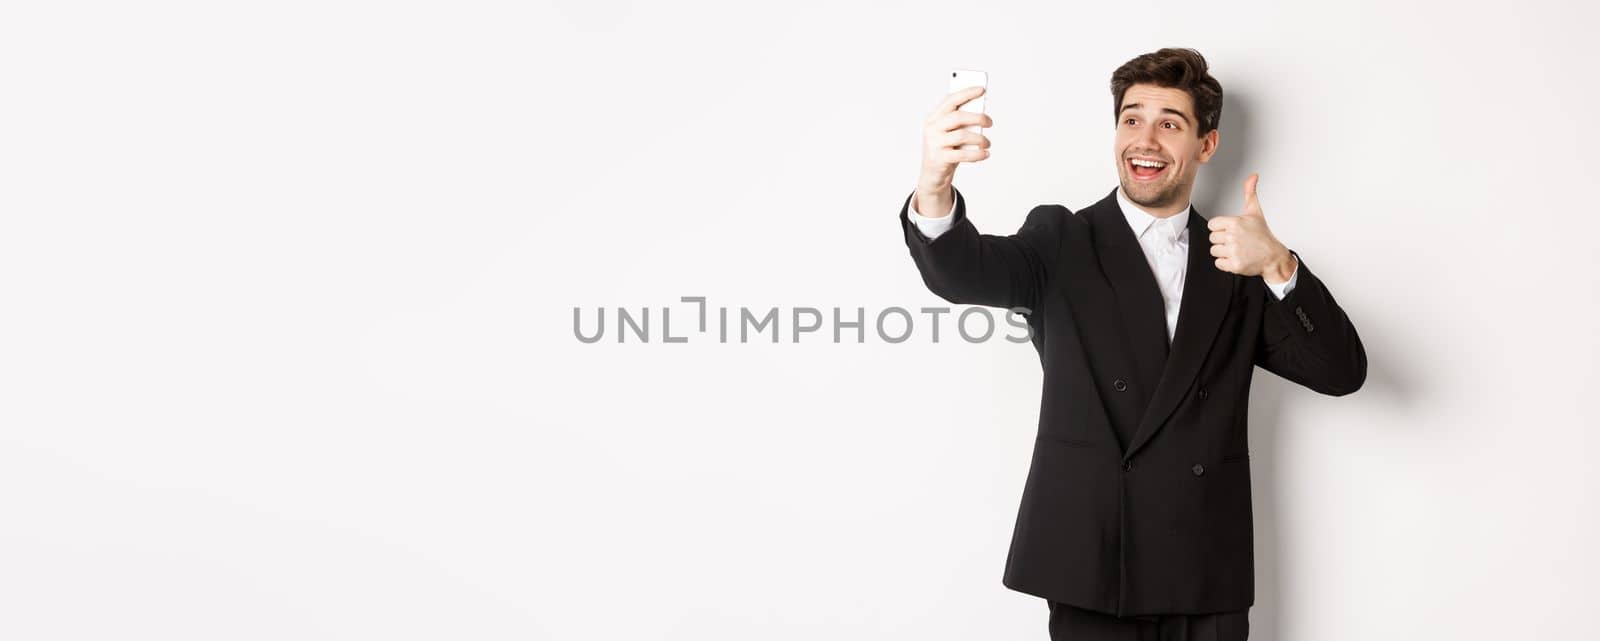 Portrait of good-looking man taking selfie on new year party, wearing suit, taking photo on smartphone and showing thumbs-up, standing against white background.